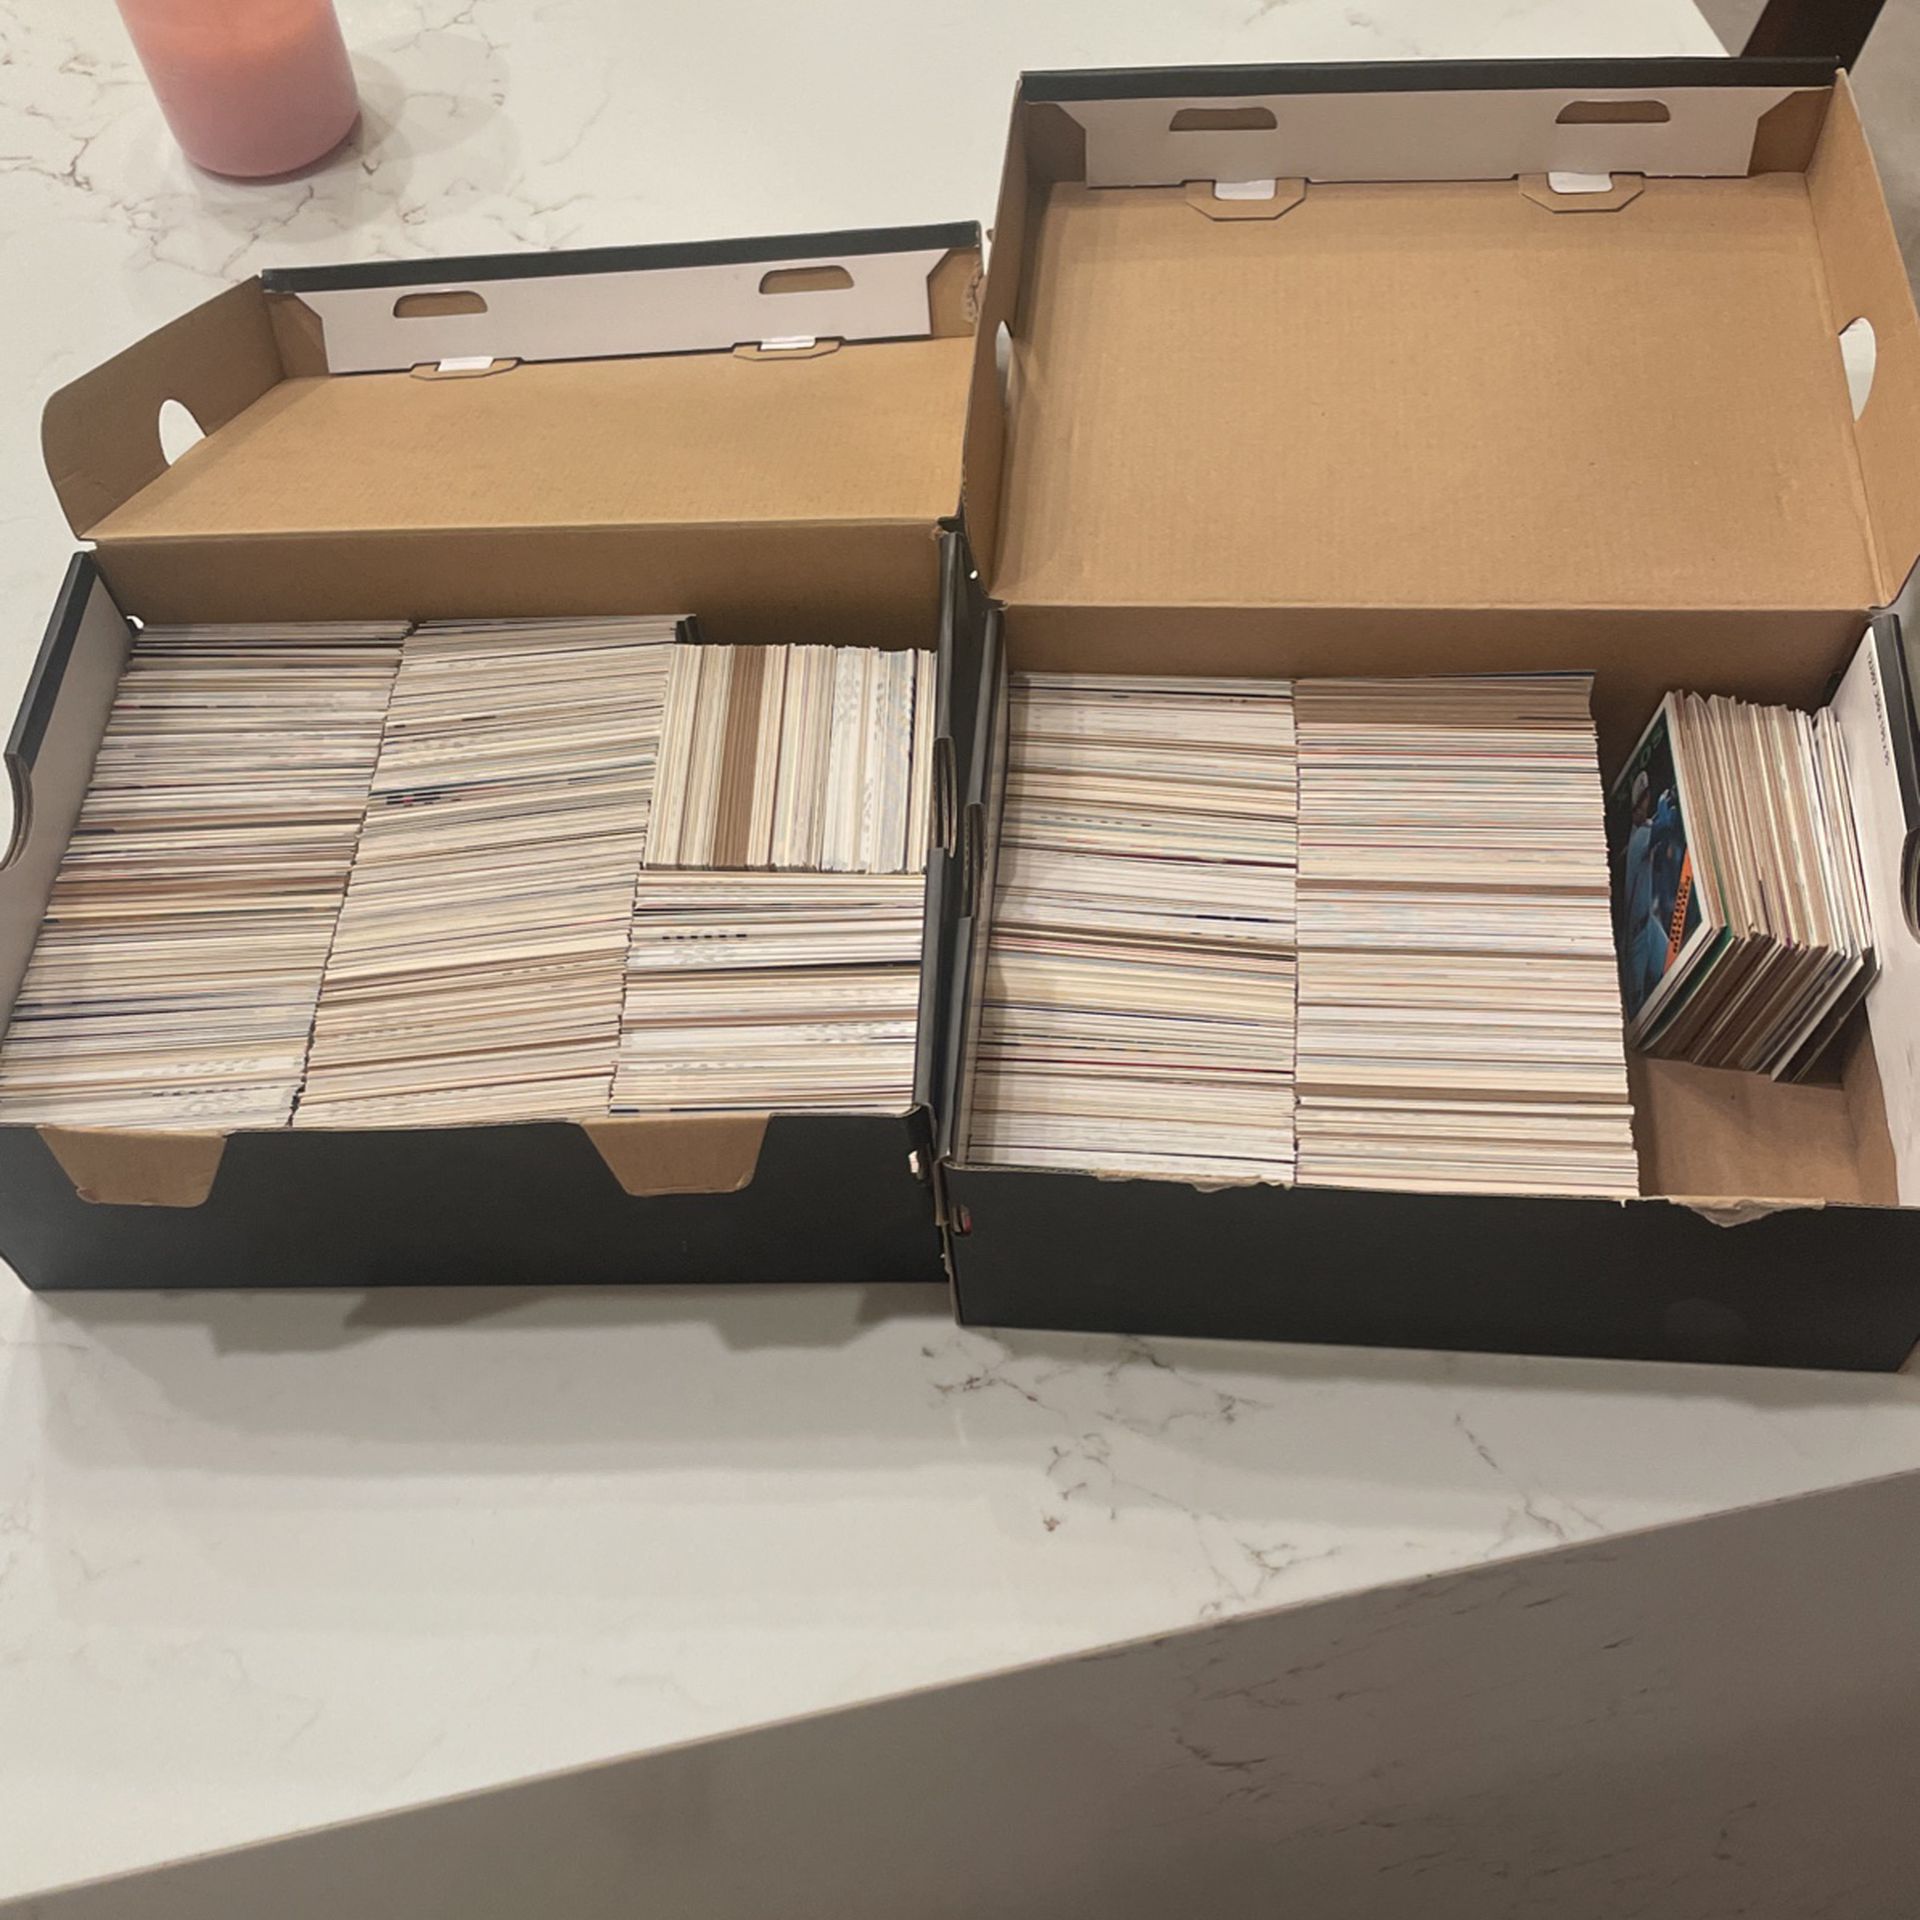 2 sneaker boxes full of cards (Looks around 1,500)